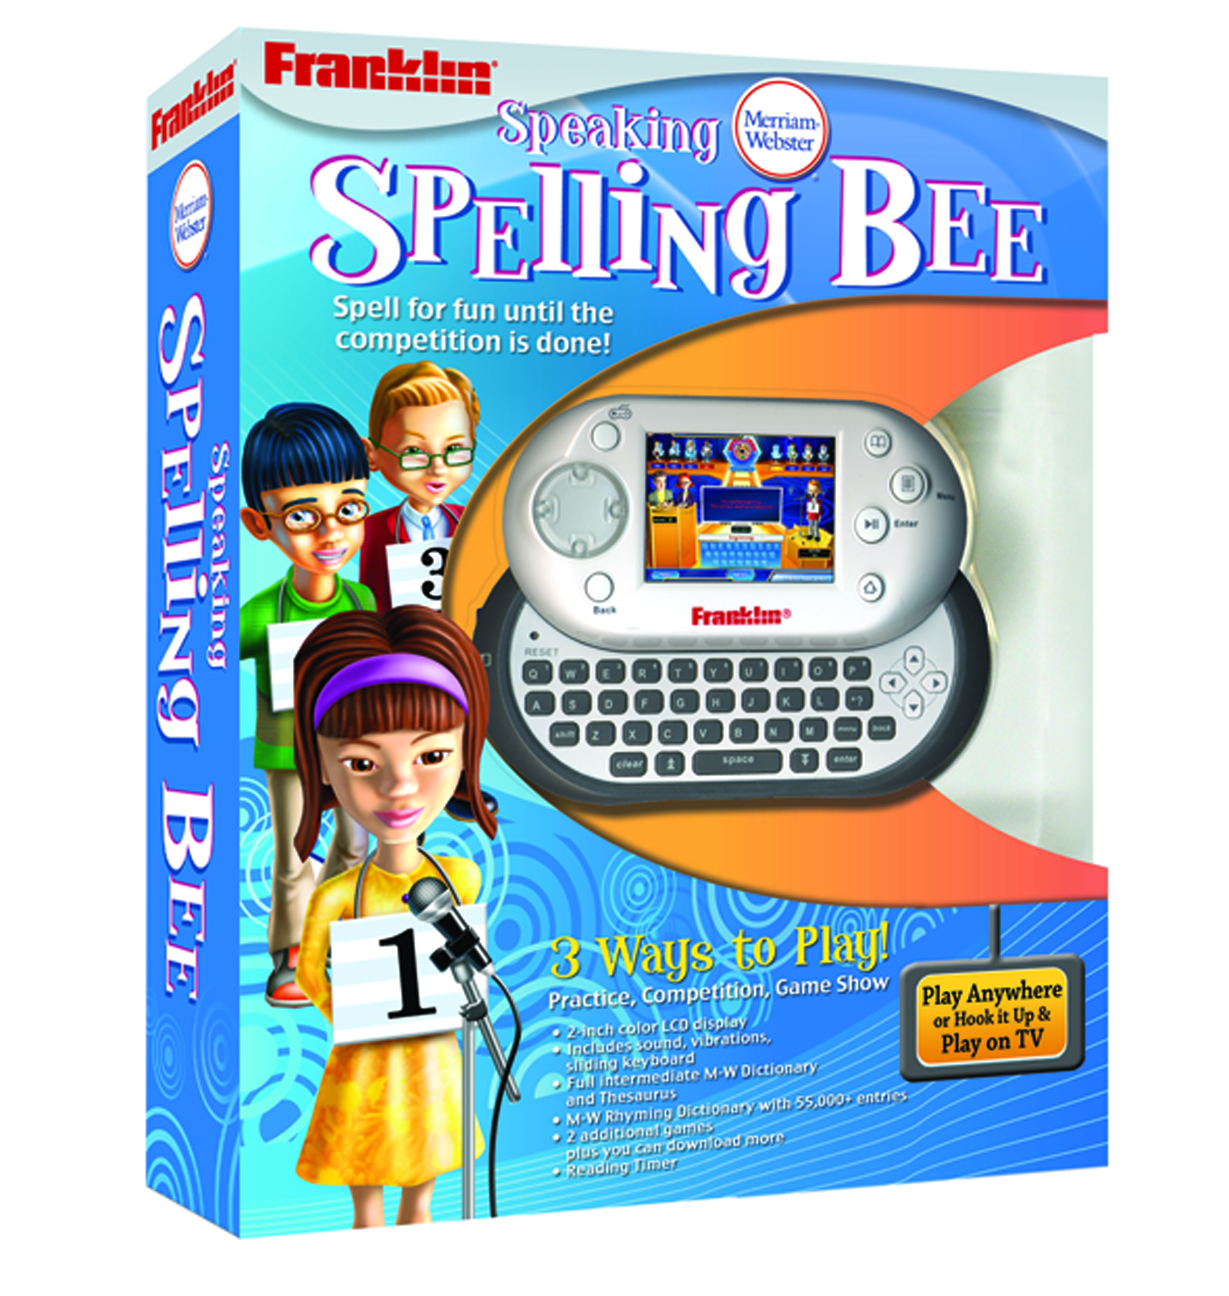 electronic spelling game